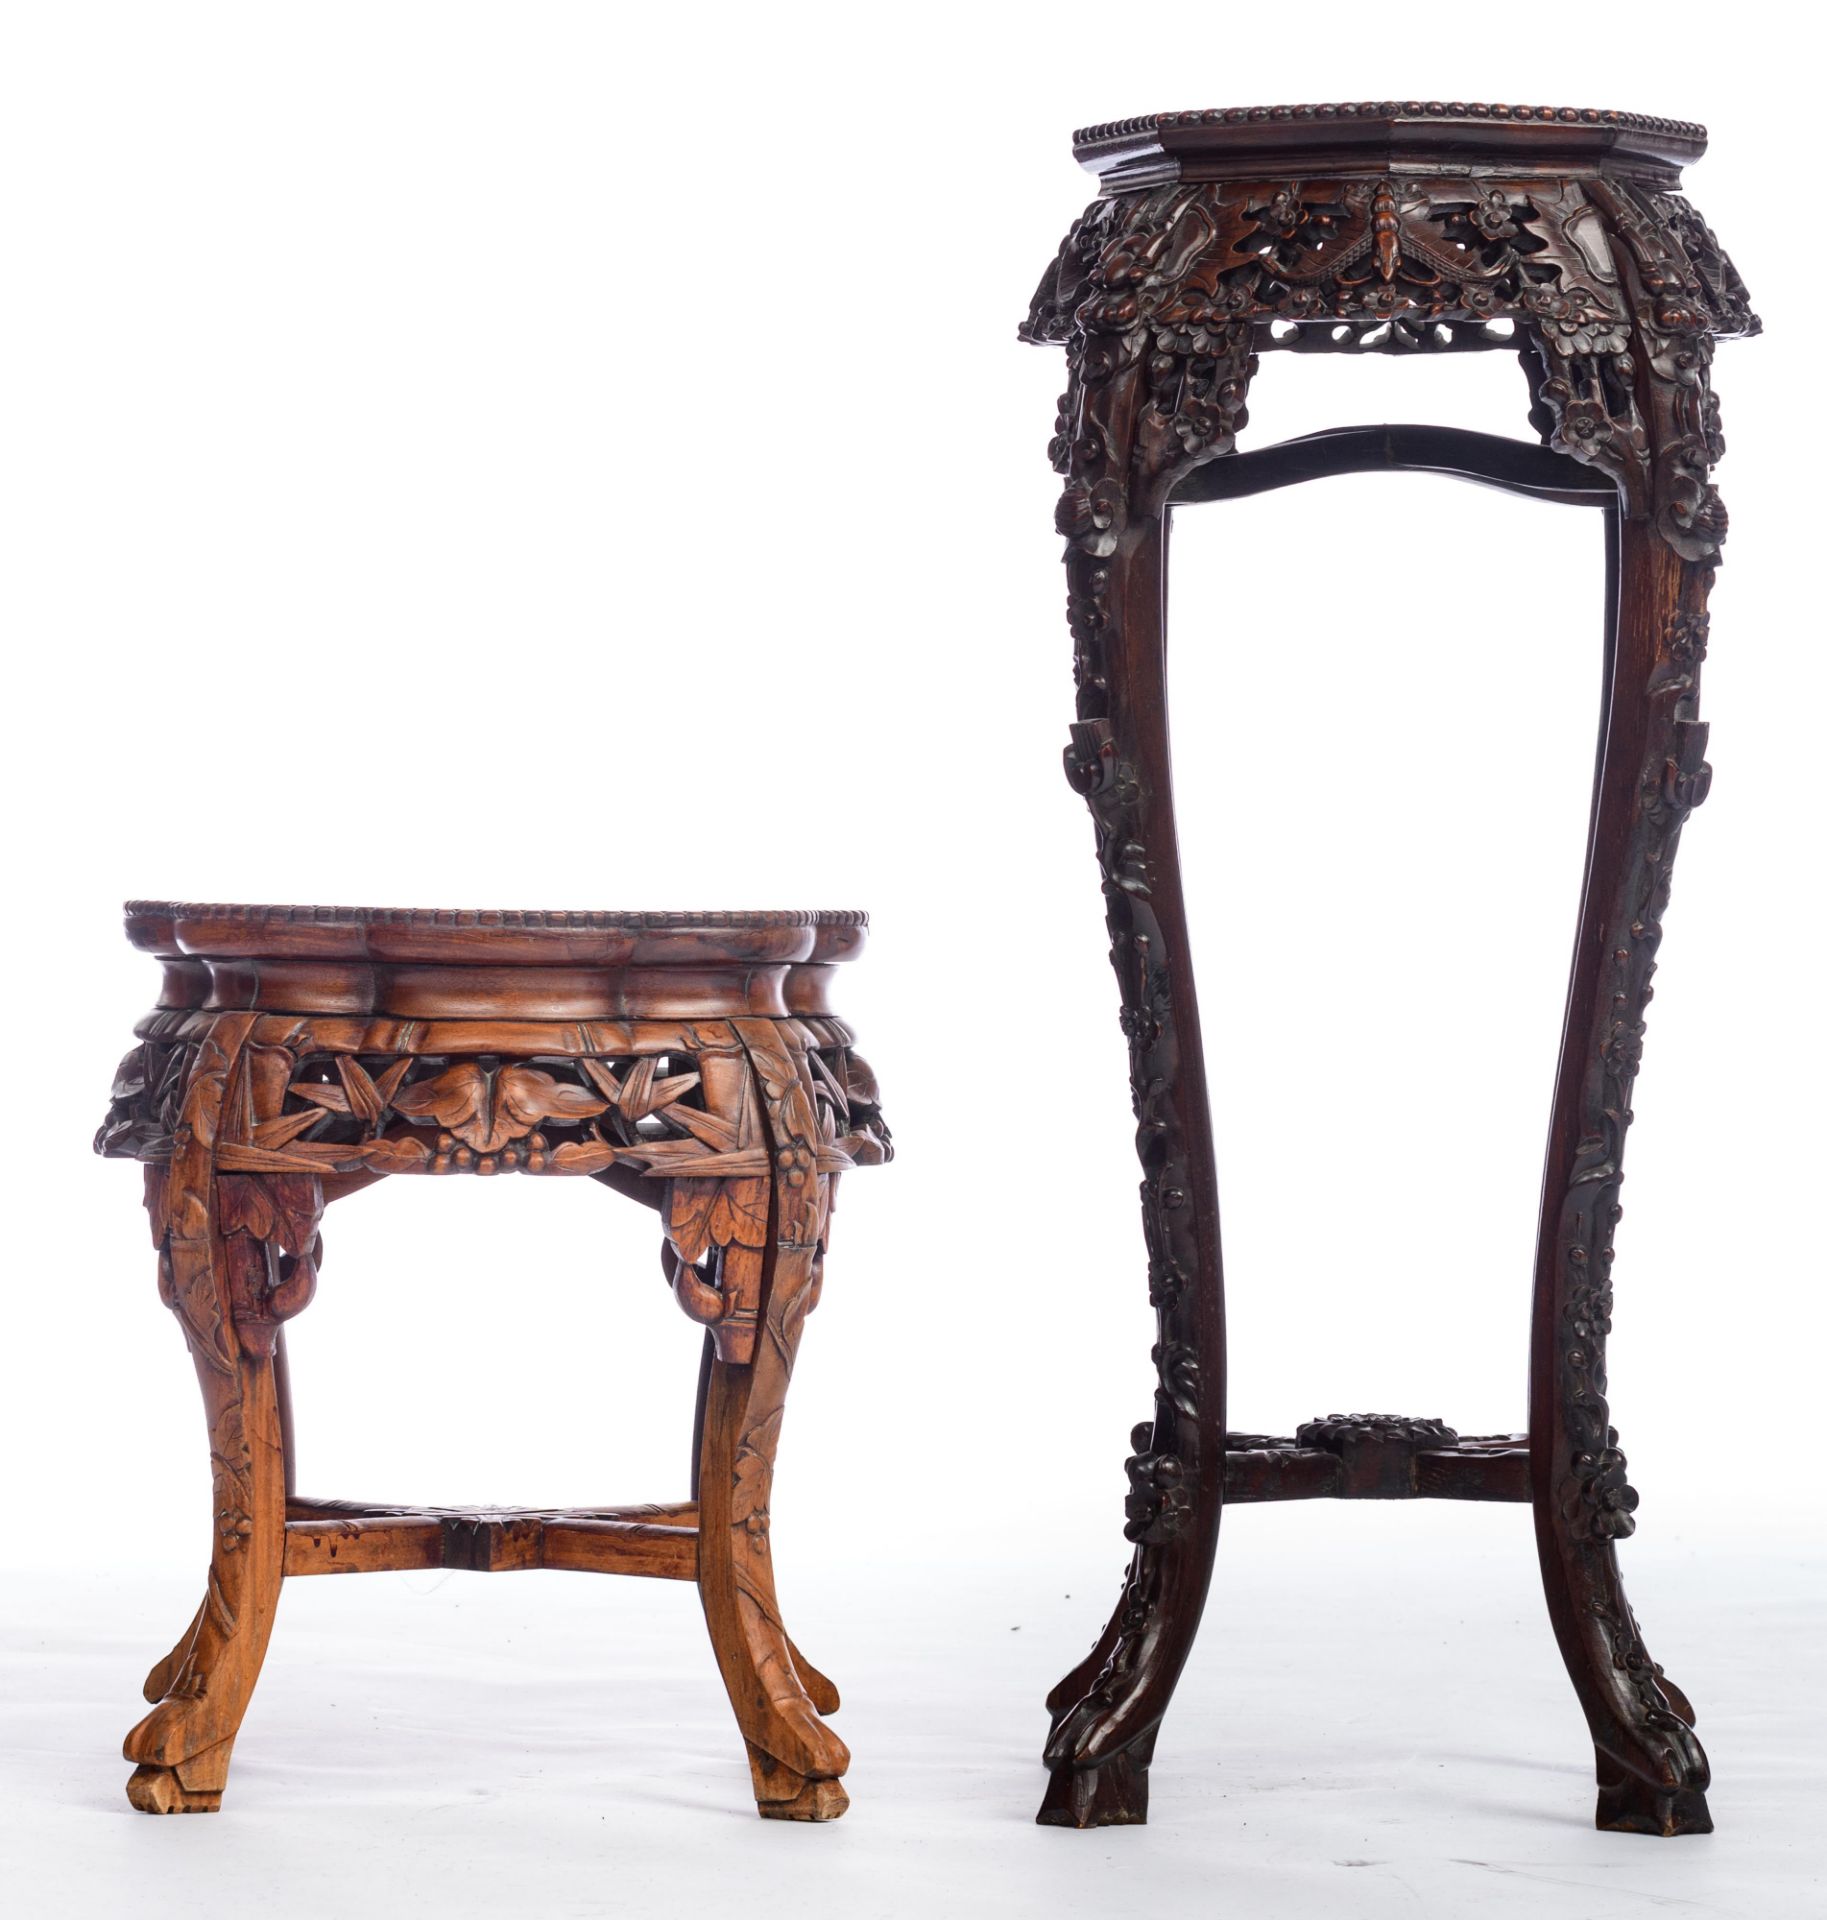 Two Chinese richly carved exotic hardwood stands, H 48 - 91 - W 40 - 42 cm - Image 3 of 7